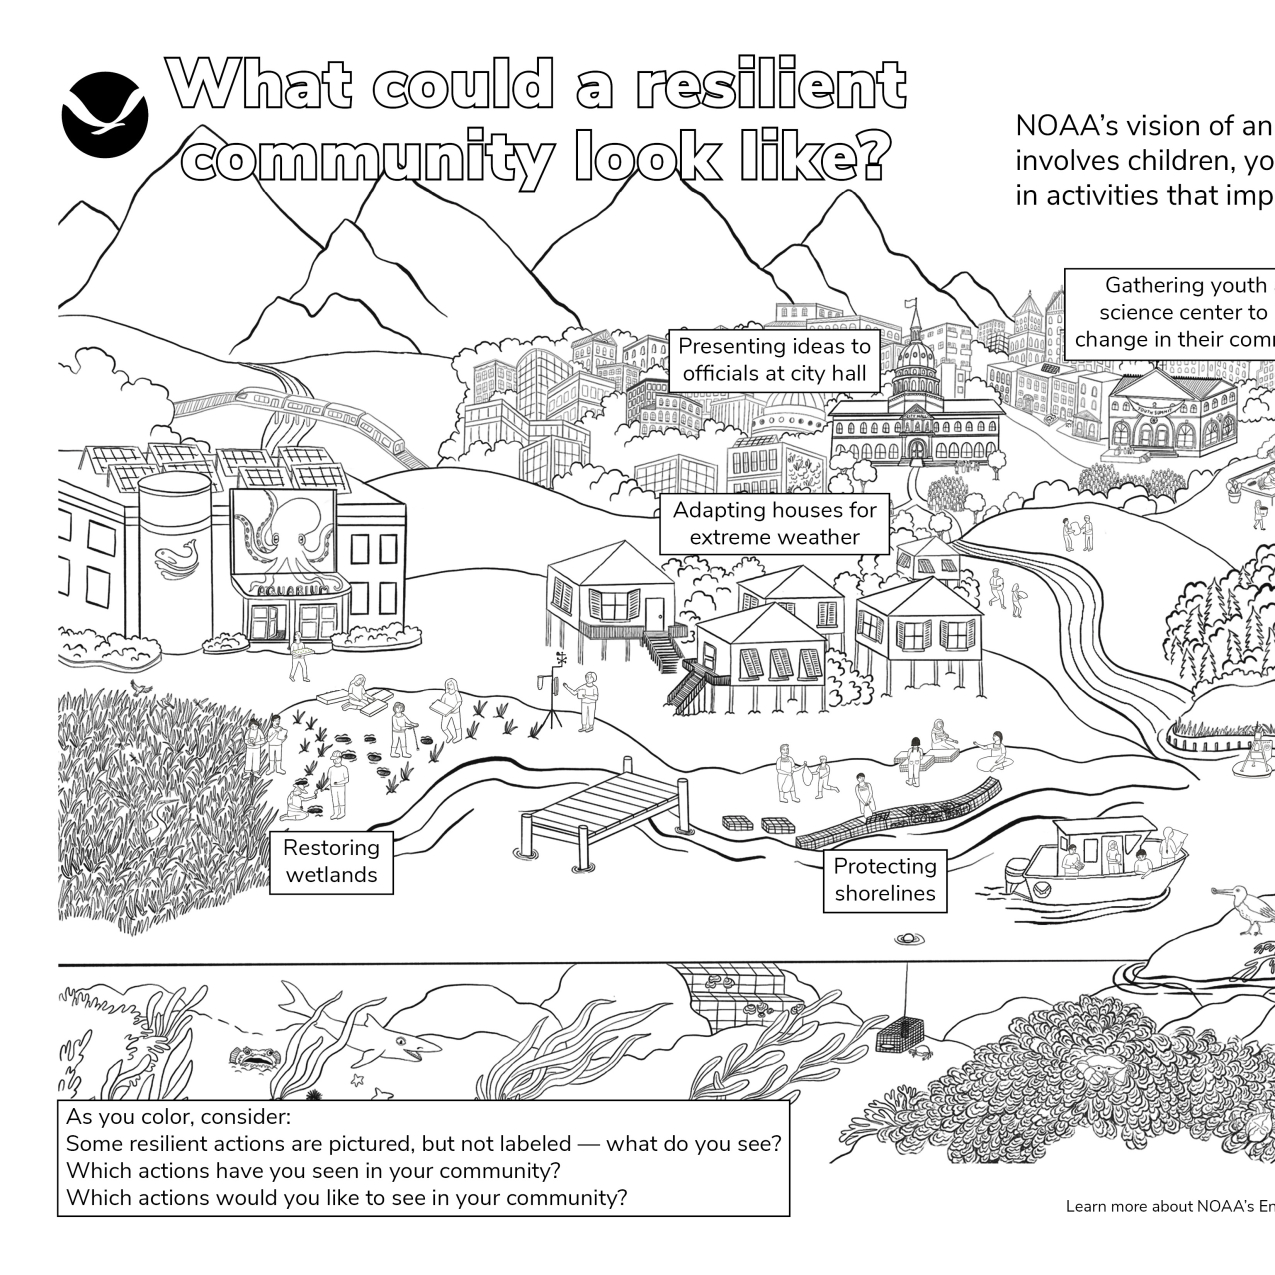 Line art illustration of the NOAA Environmental Literacy Program's Vision of A Resilient Community depicting a city along a coast and river. For an accessible version, please explore the PDF found at: https://www.noaa.gov/education/multimedia/photos-images/community-resilience-coloring-page